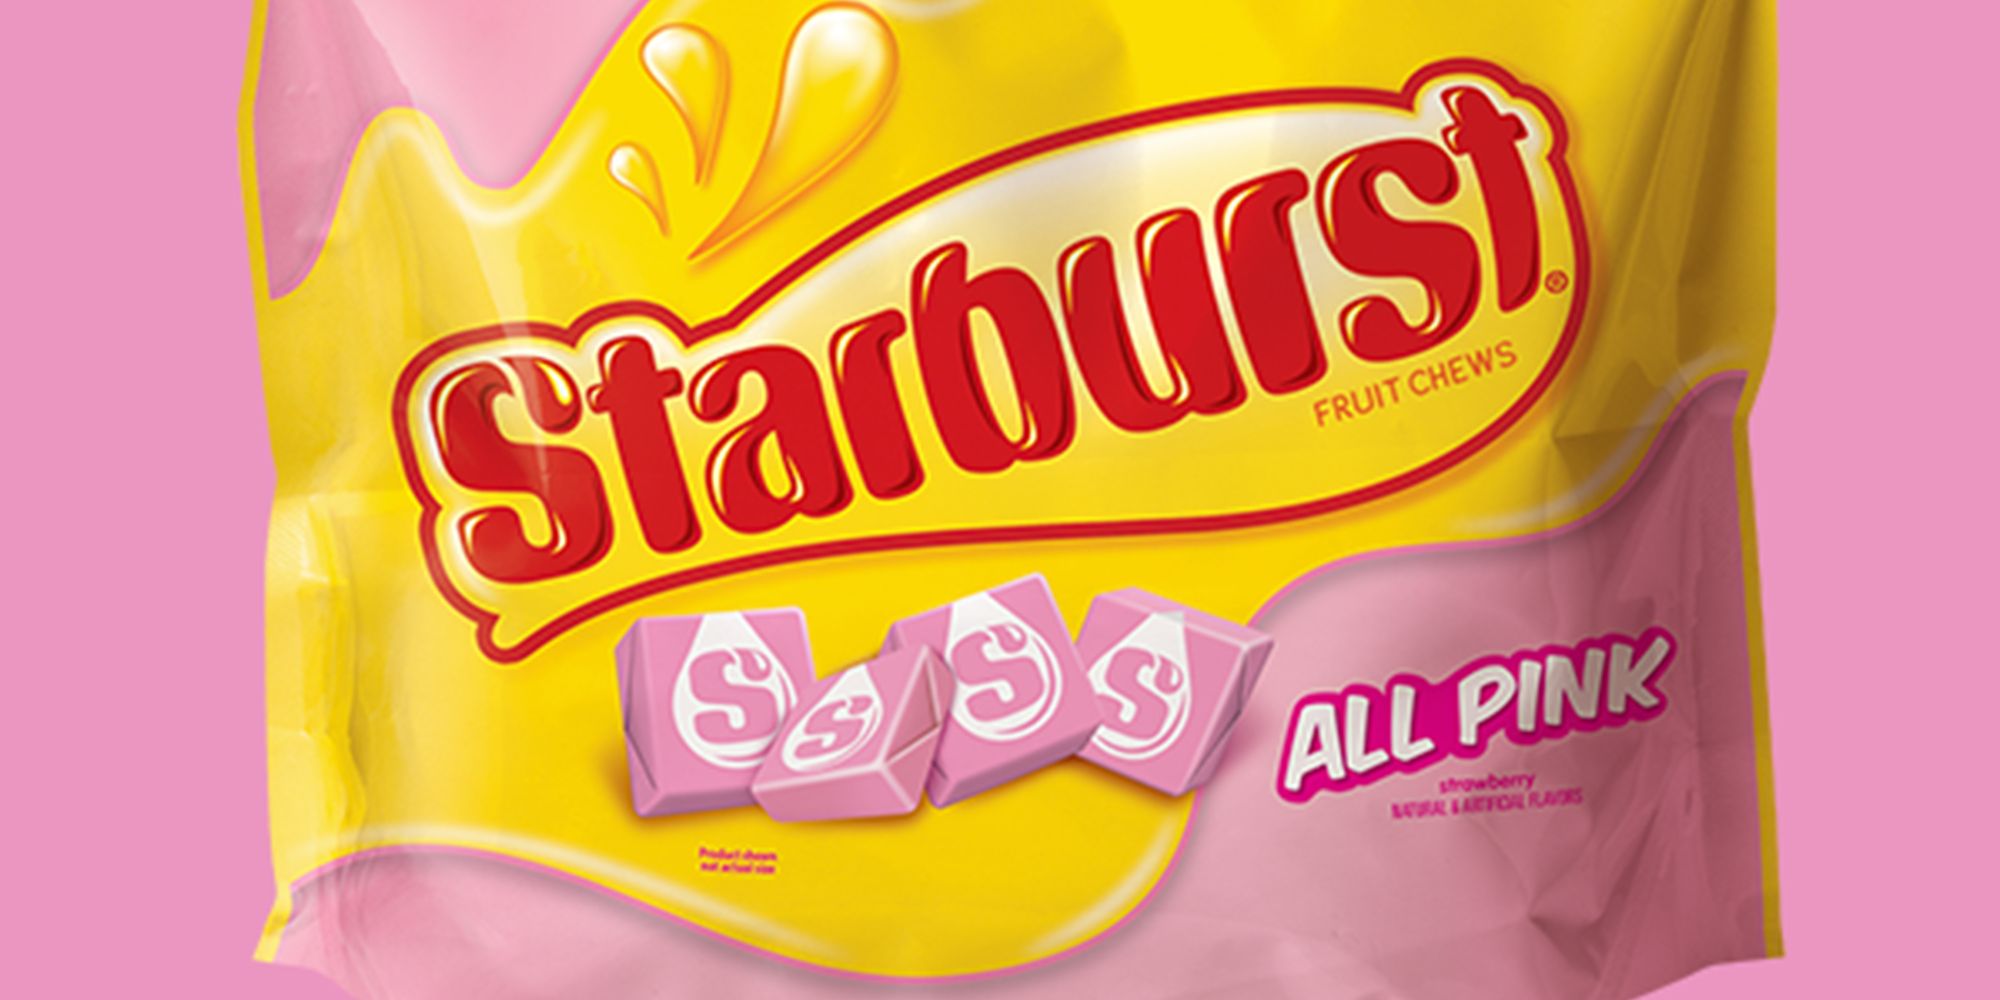 Starburst Just Announced That Its All Pink Packs Are Permanently Available In The Candy Aisle